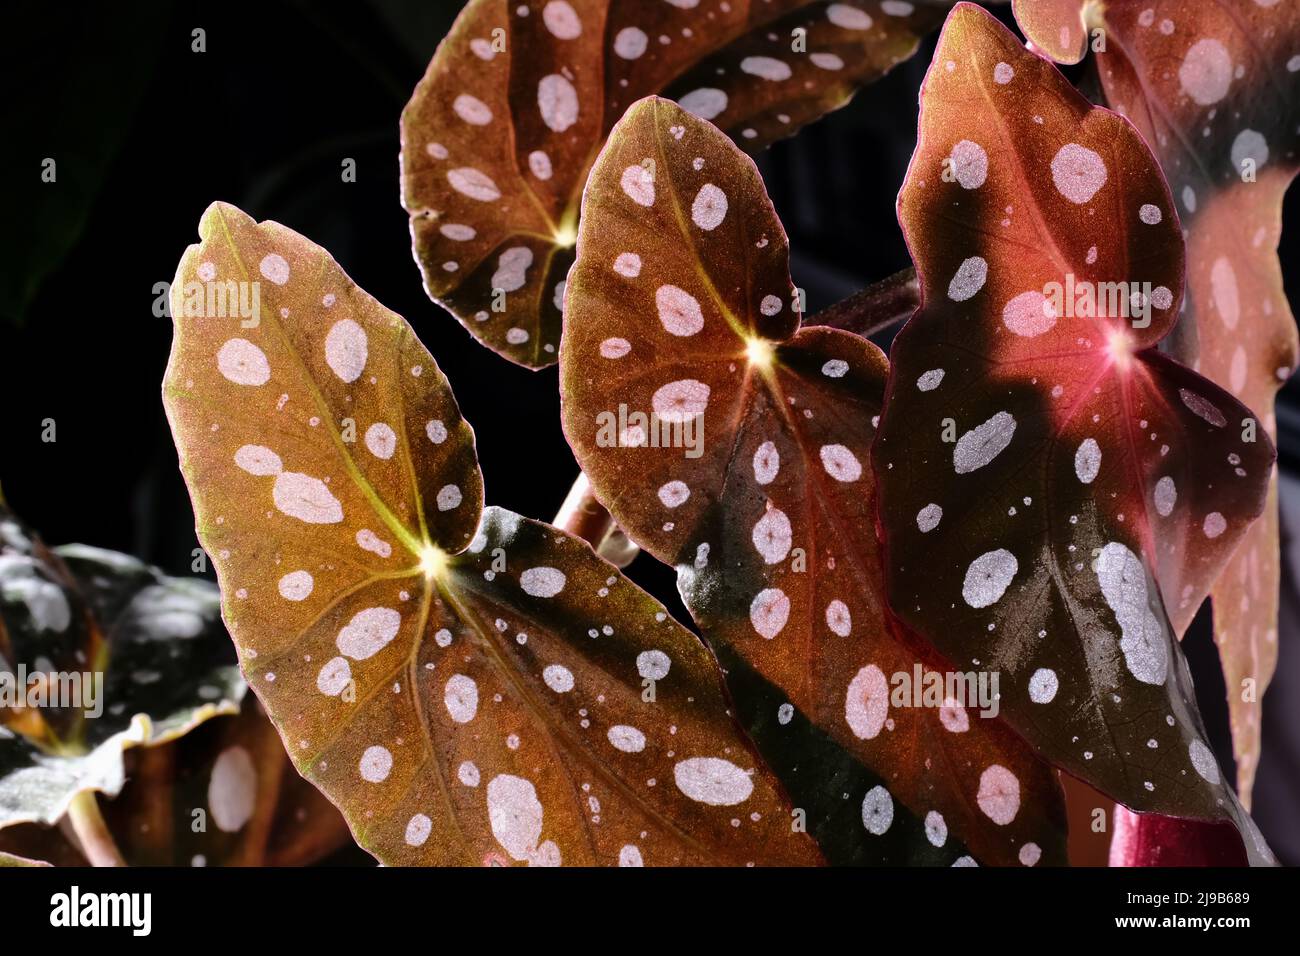 Begonia maculata plant on black background. Trout begonia leaves with white dots and metallic shimmer, close up. Spotted begonia houseplant with pink Stock Photo